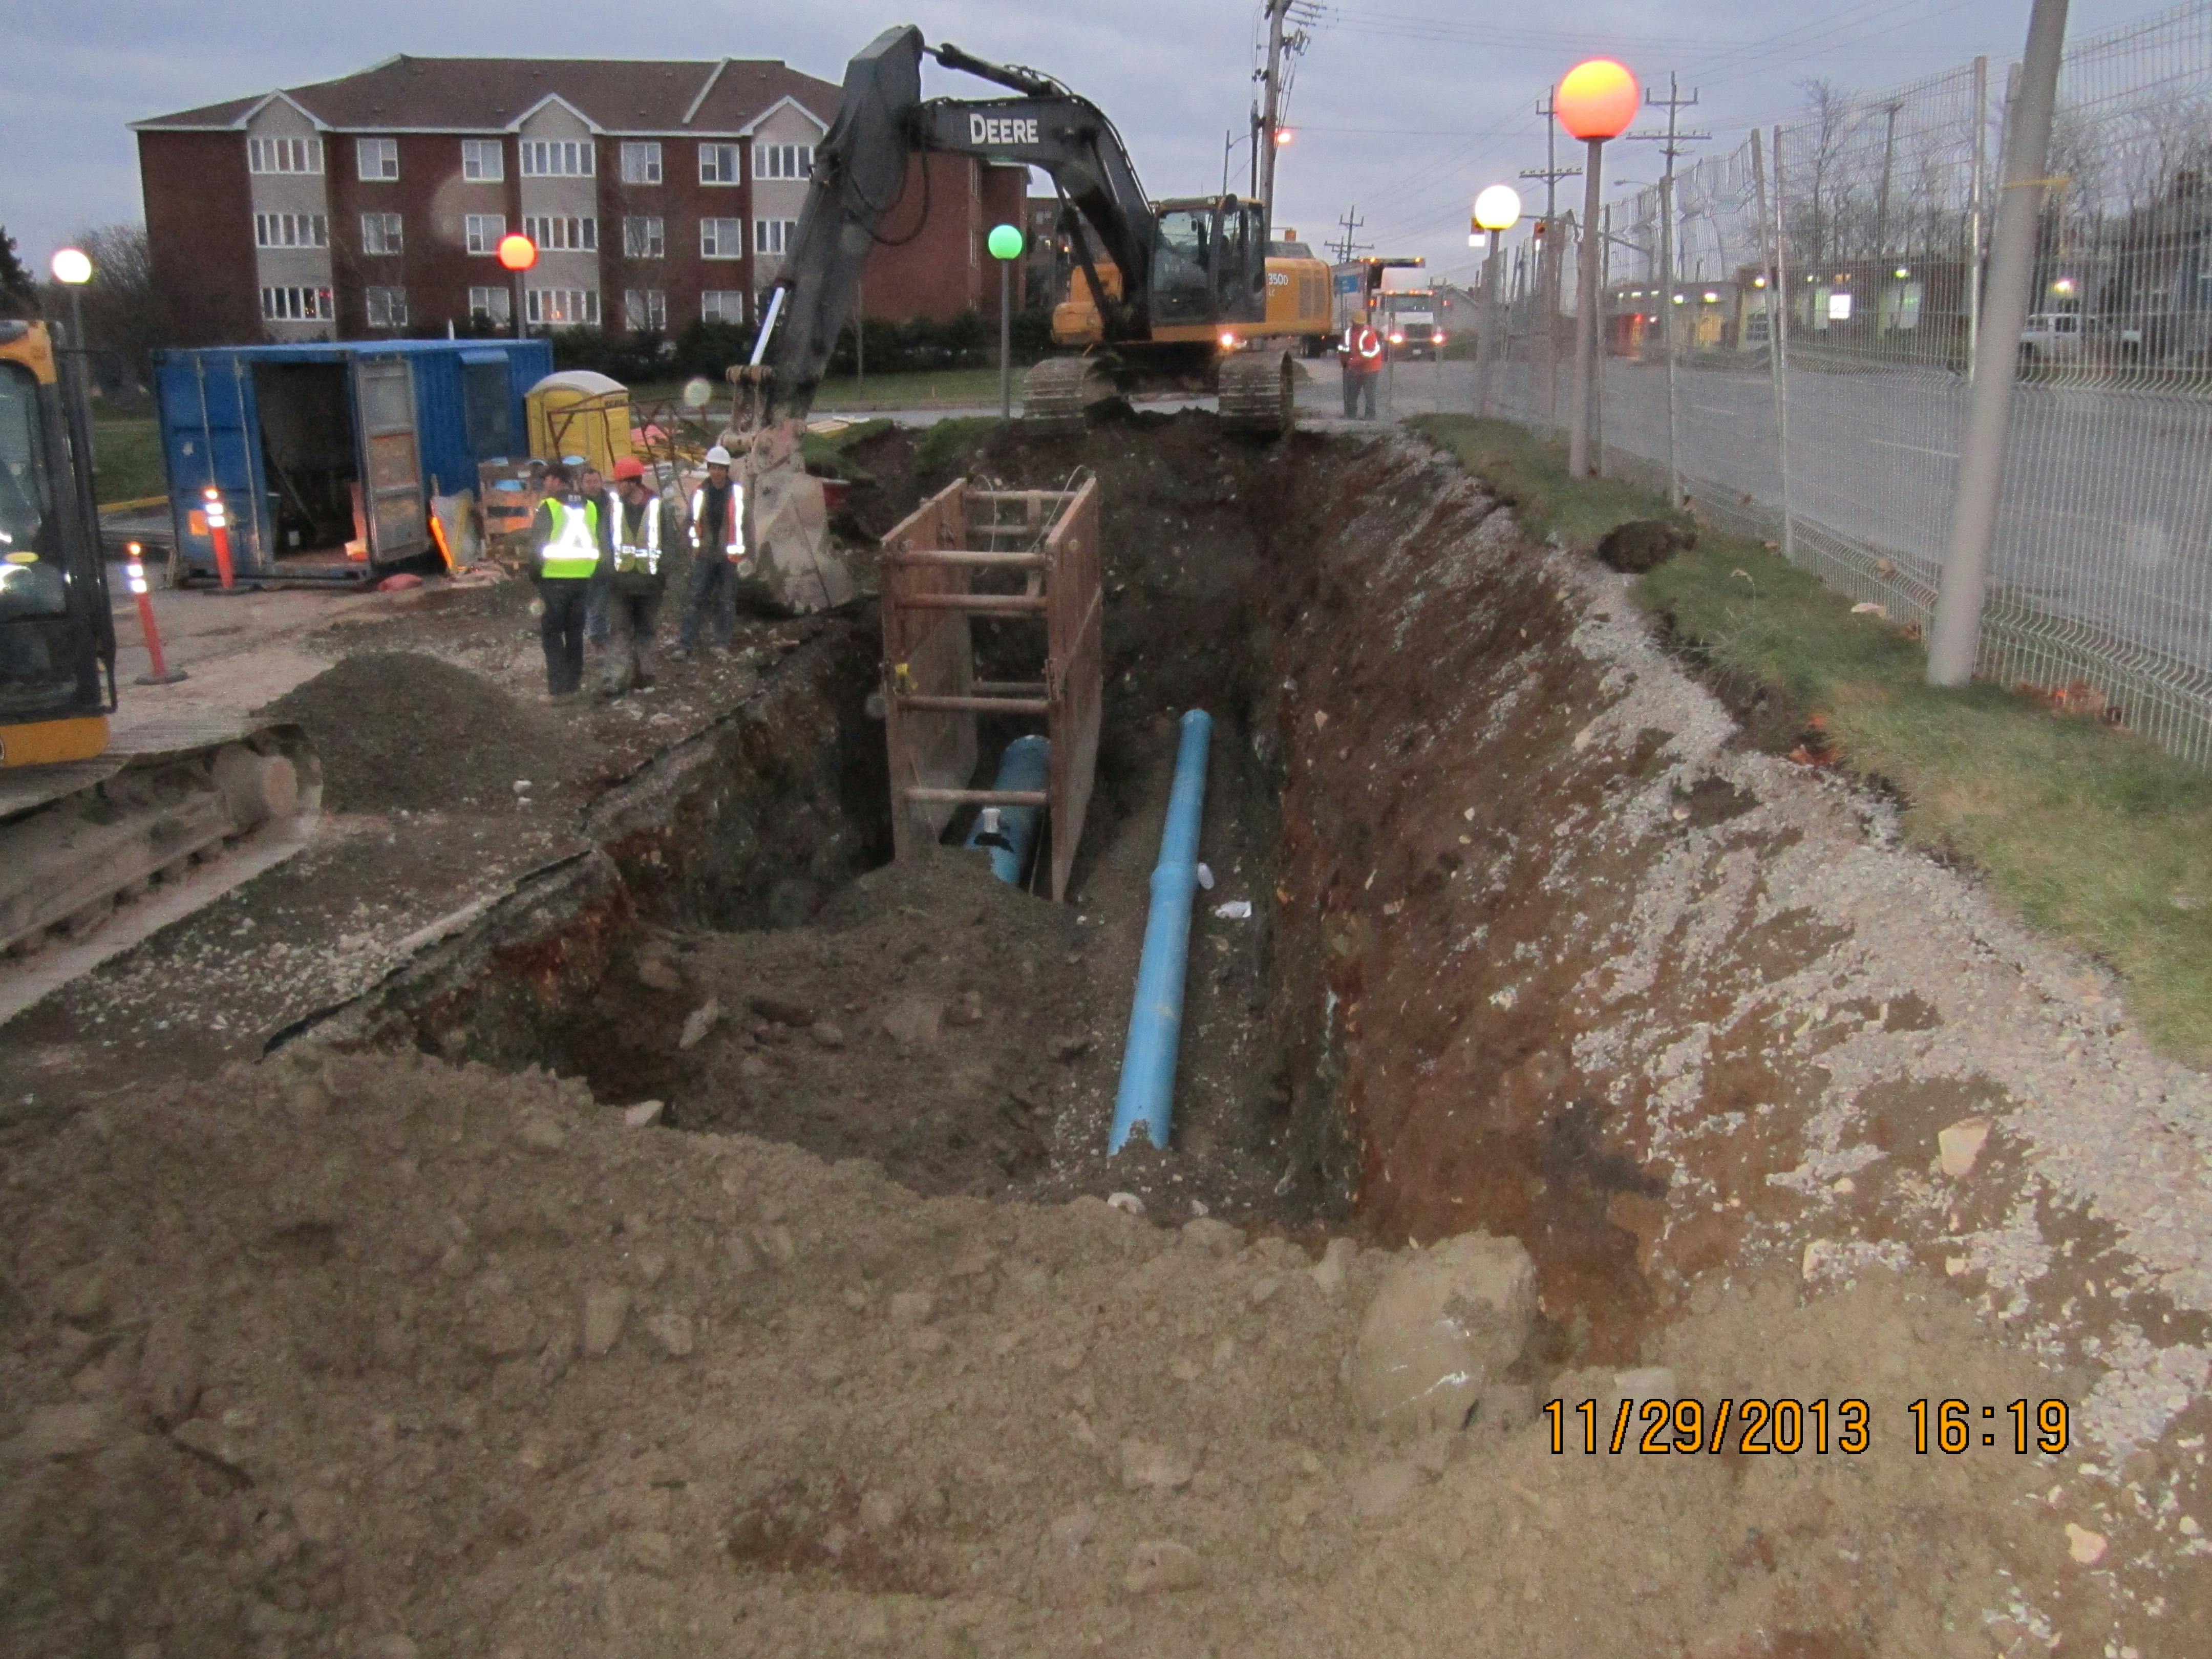 The photo shows a typical twin water main installation